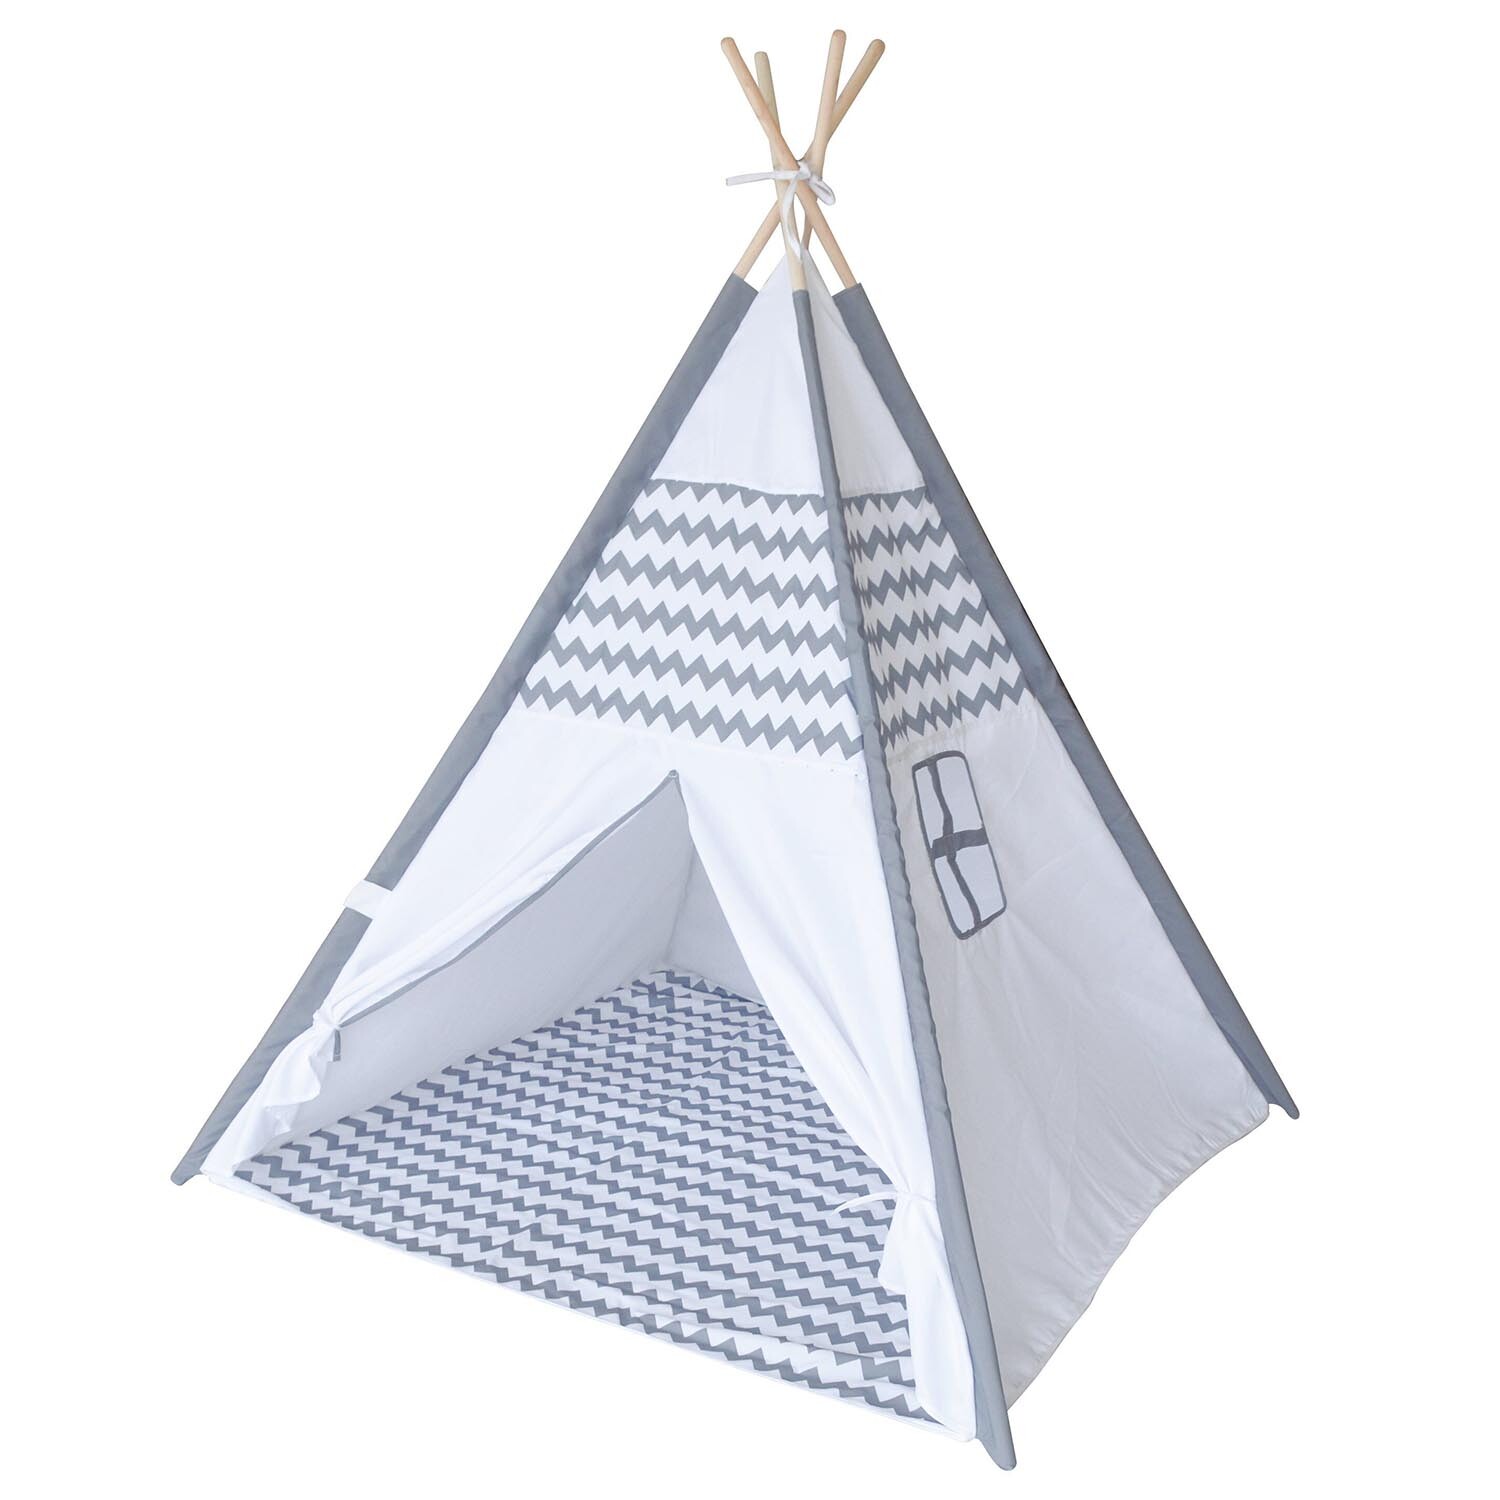 Imaginate Teepee Tent Grey and White Image